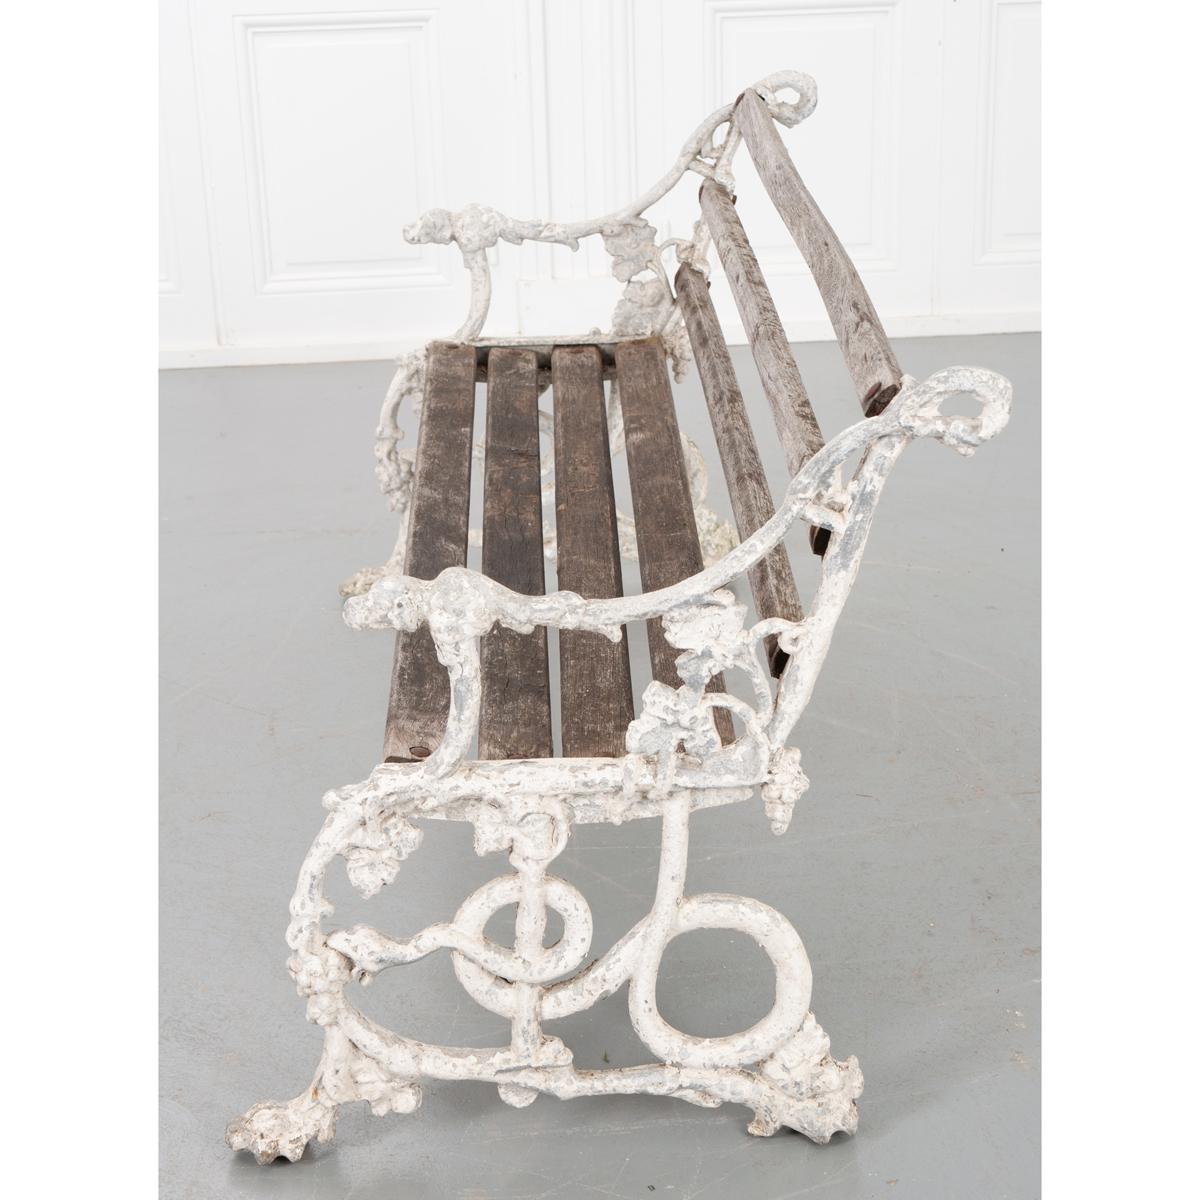 A lovely painted iron and wood garden bench from France. The unique iron base, cast in the forms of grape vines and intertwined snakes supports the wooden seat and seat back. Measure: Seat: 14-?” H.